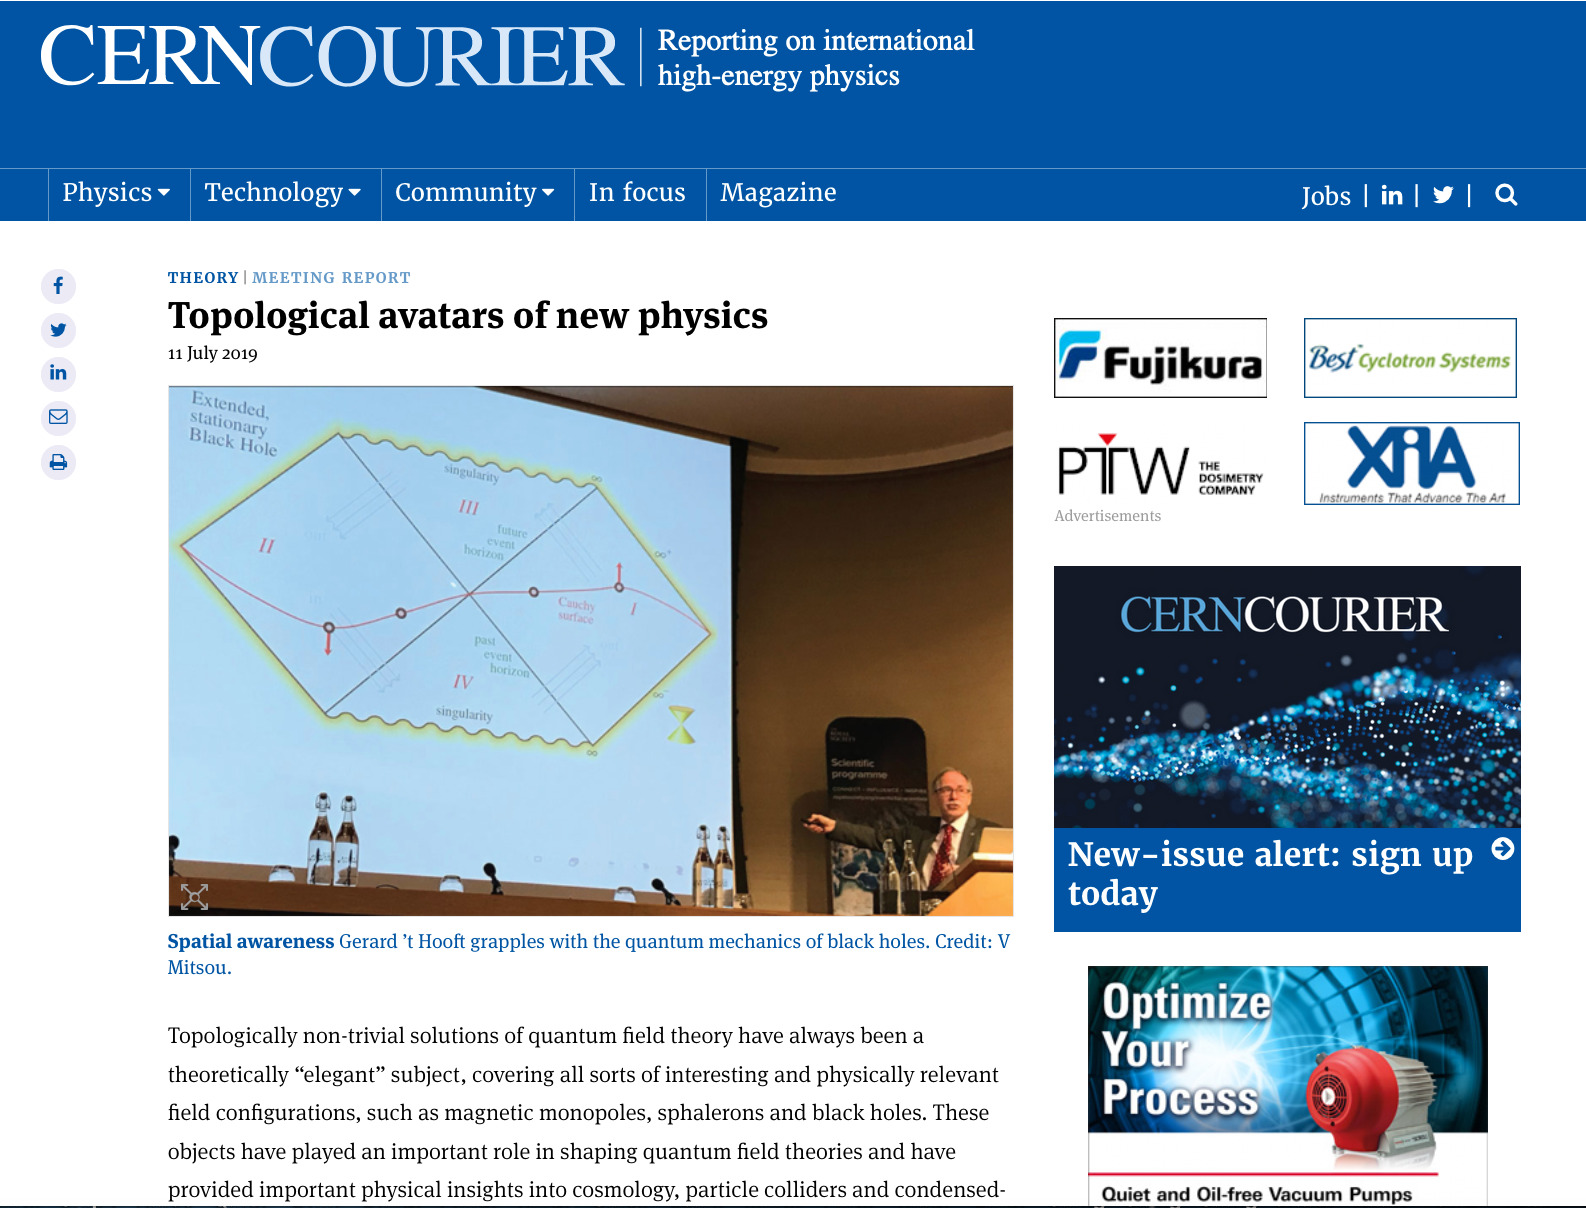 CERN Courier reports on the  Royal Society Hooke Meeting  on Topological Avatars of New Physics.